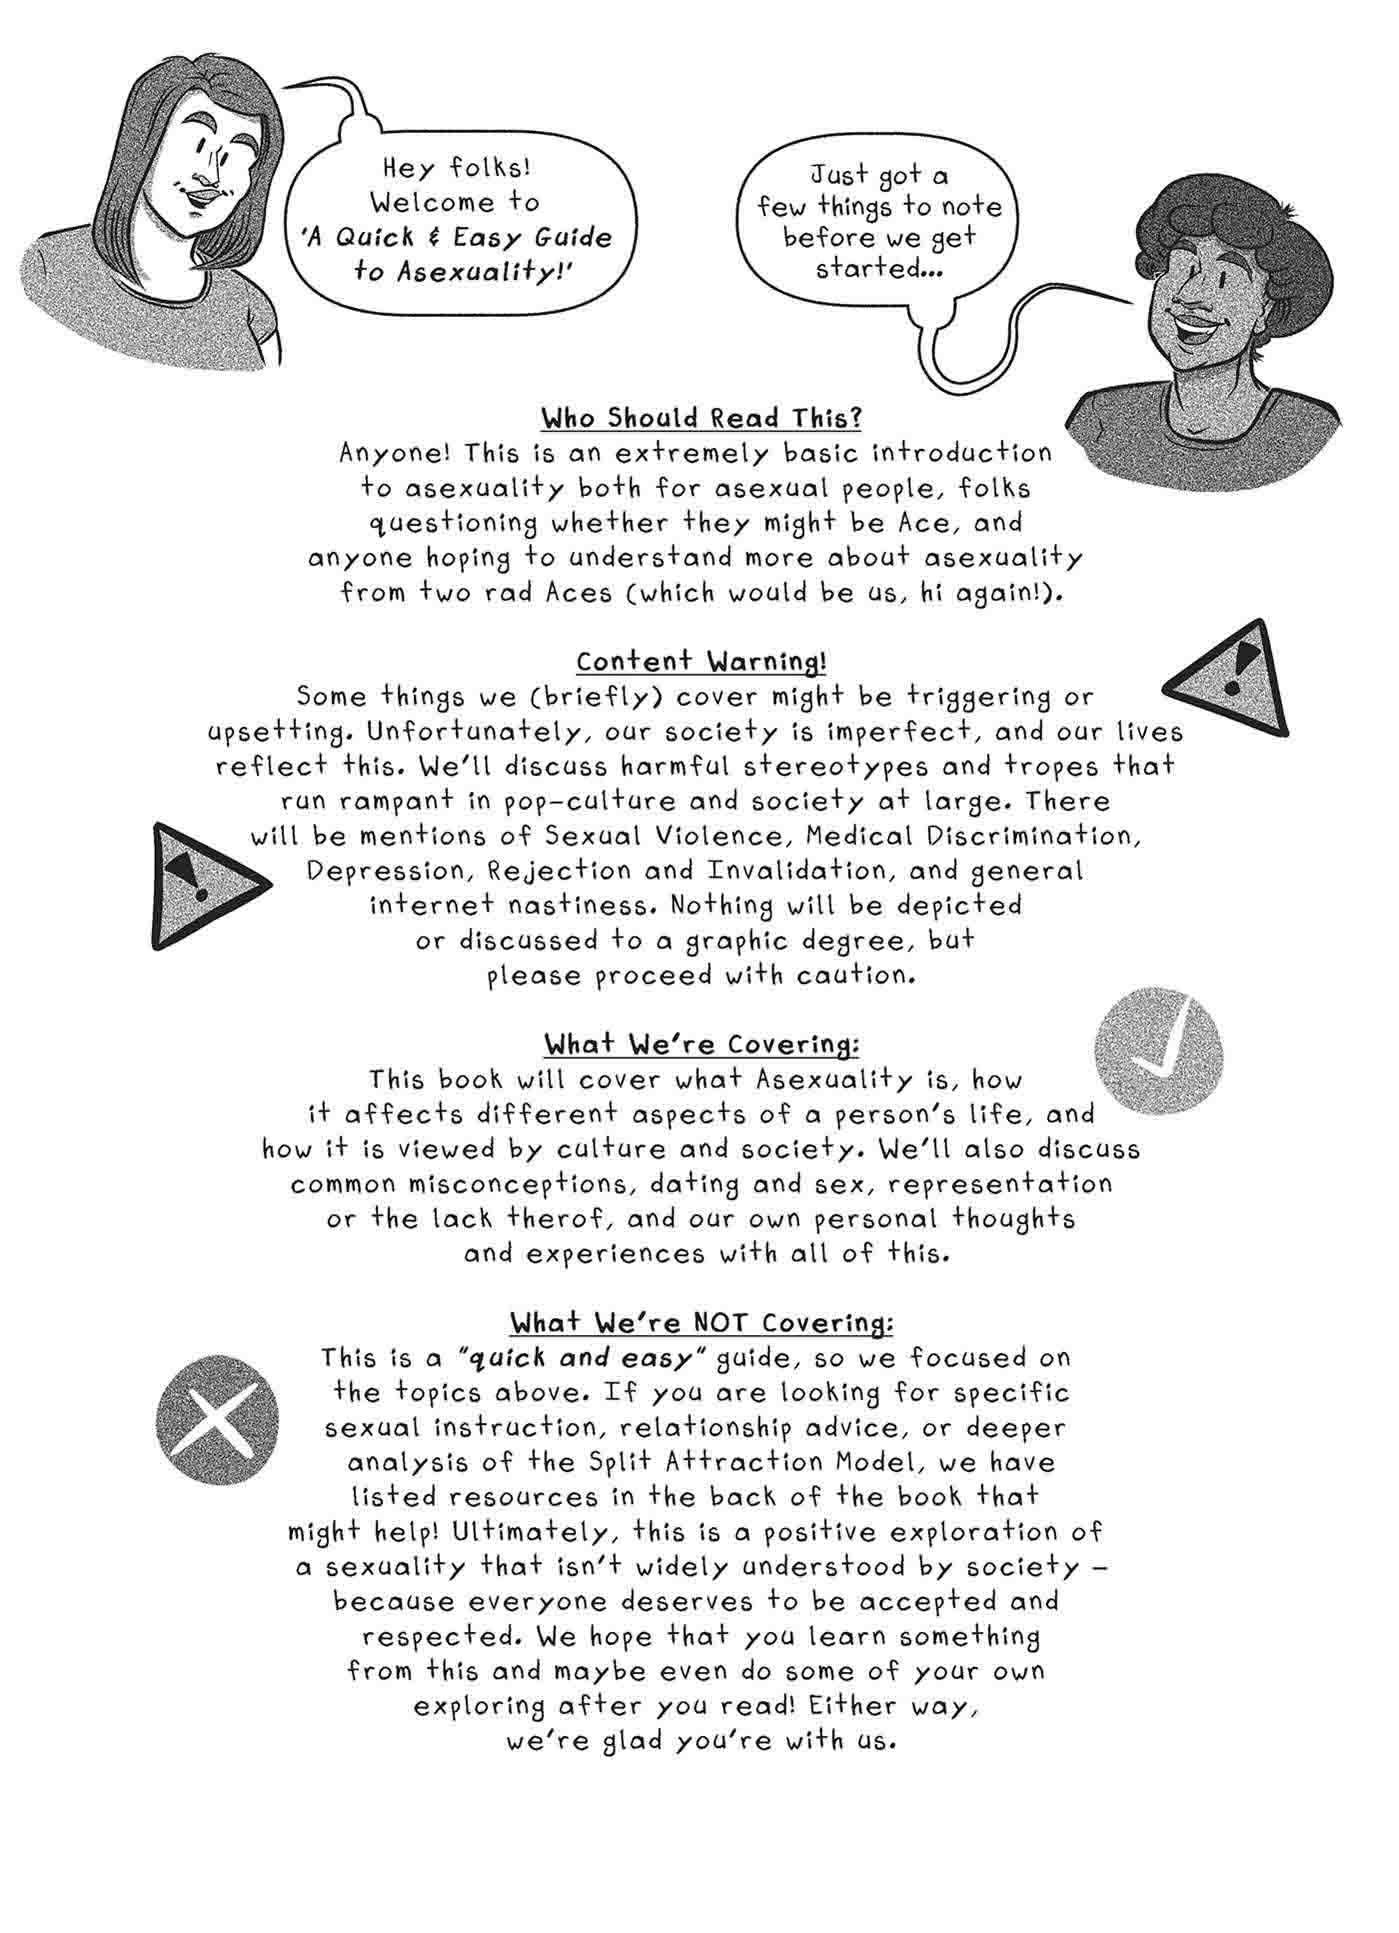 One of the inside Pages of A Quick & Easy Guide to Asexuality.